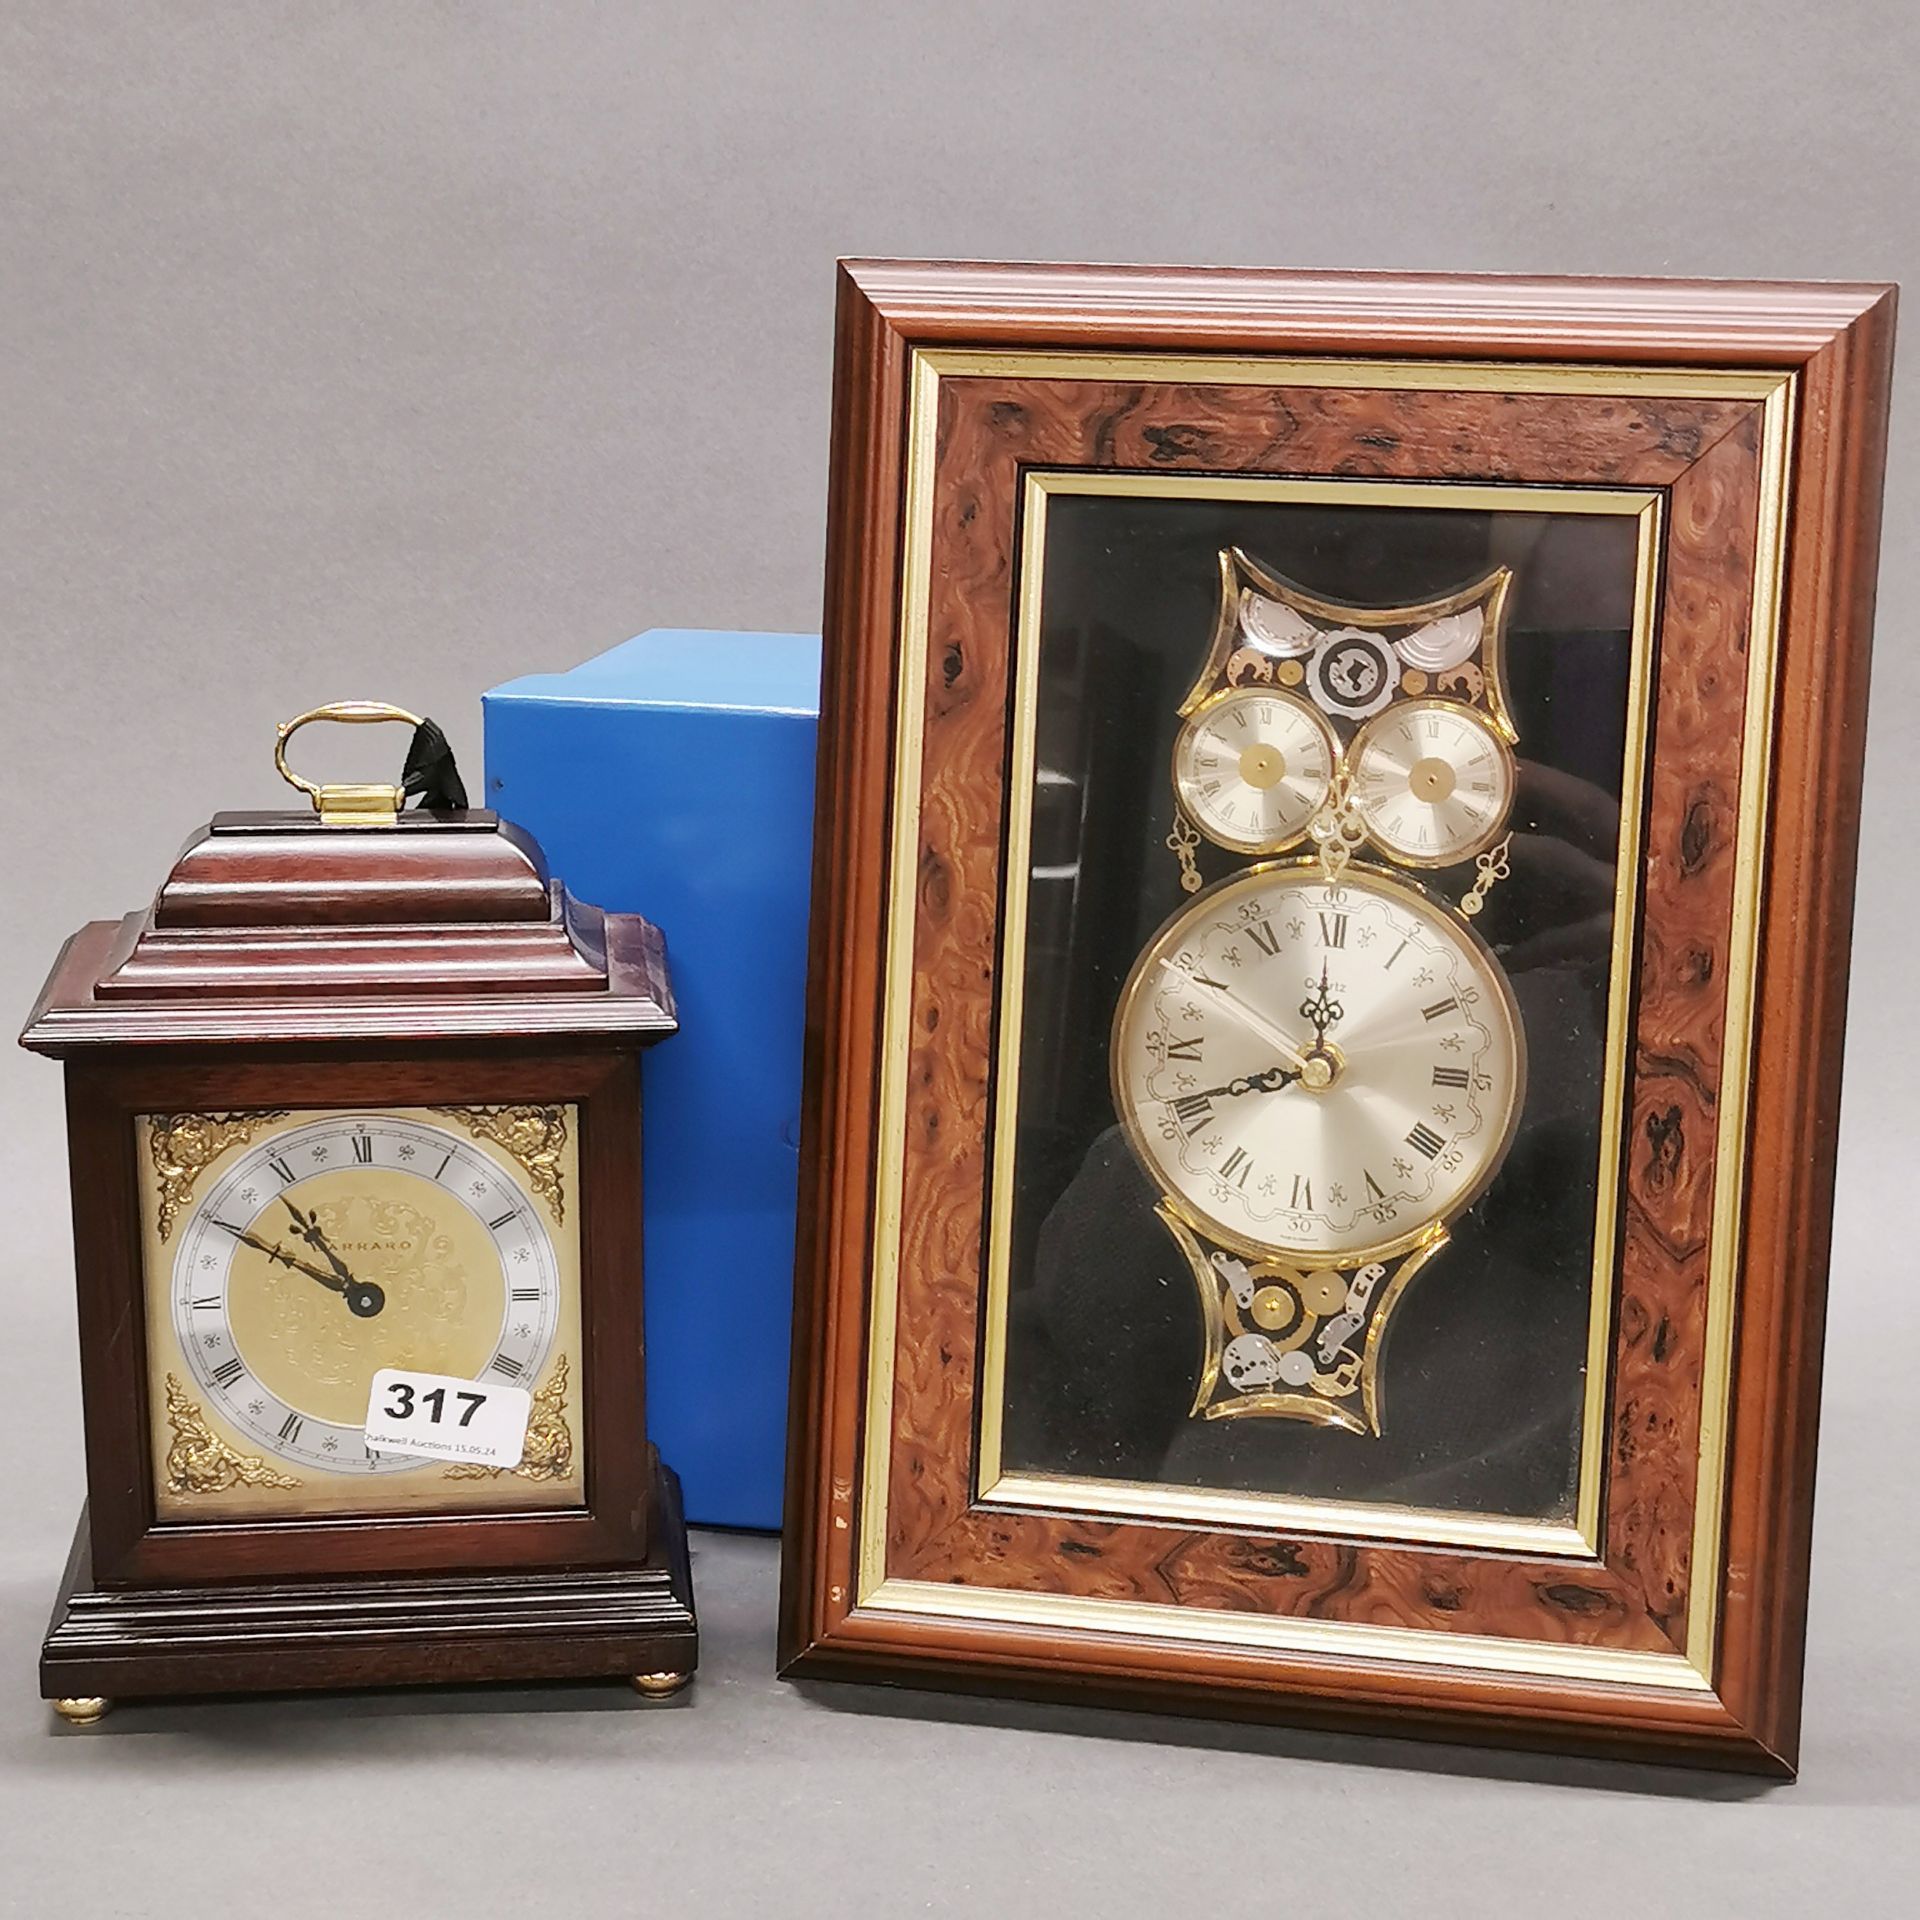 A Garrard mahogany mantel clock with box, H. 24cm. Together with a battery operated wall clock.